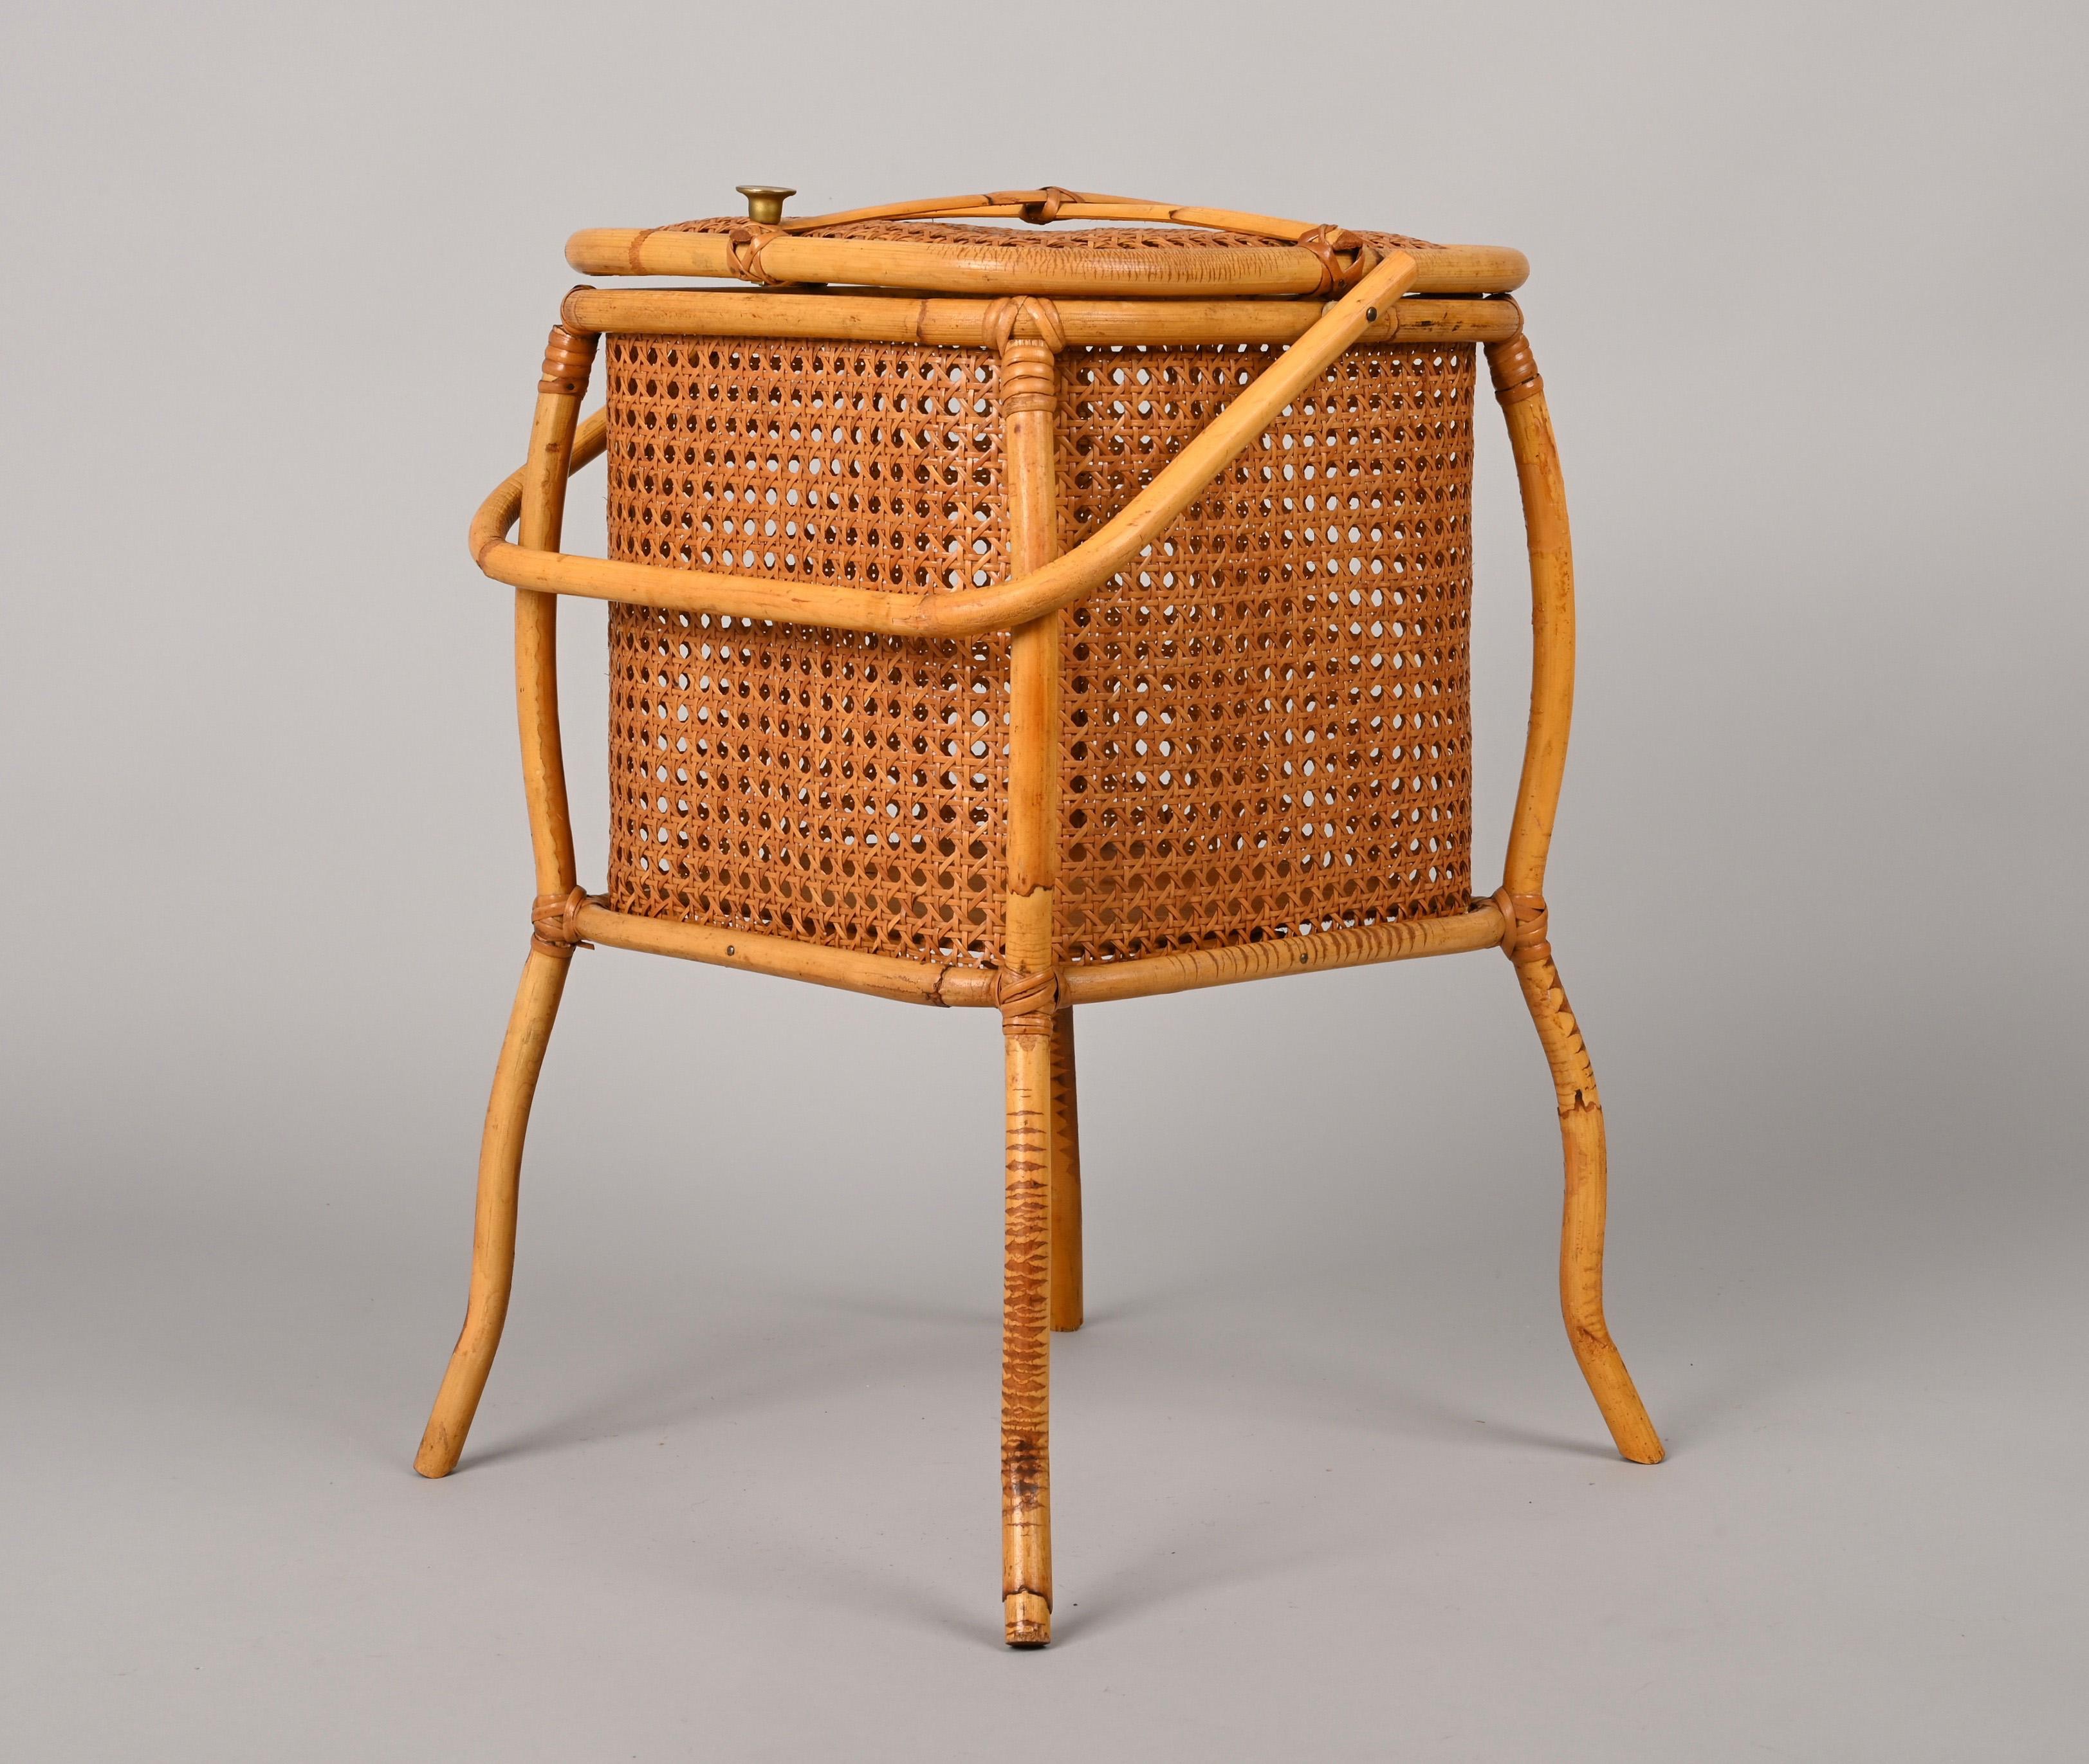 Midcentury Bamboo, Wicker and Vienna Straw Cubic Italian Magazine Basket, 1960s For Sale 6